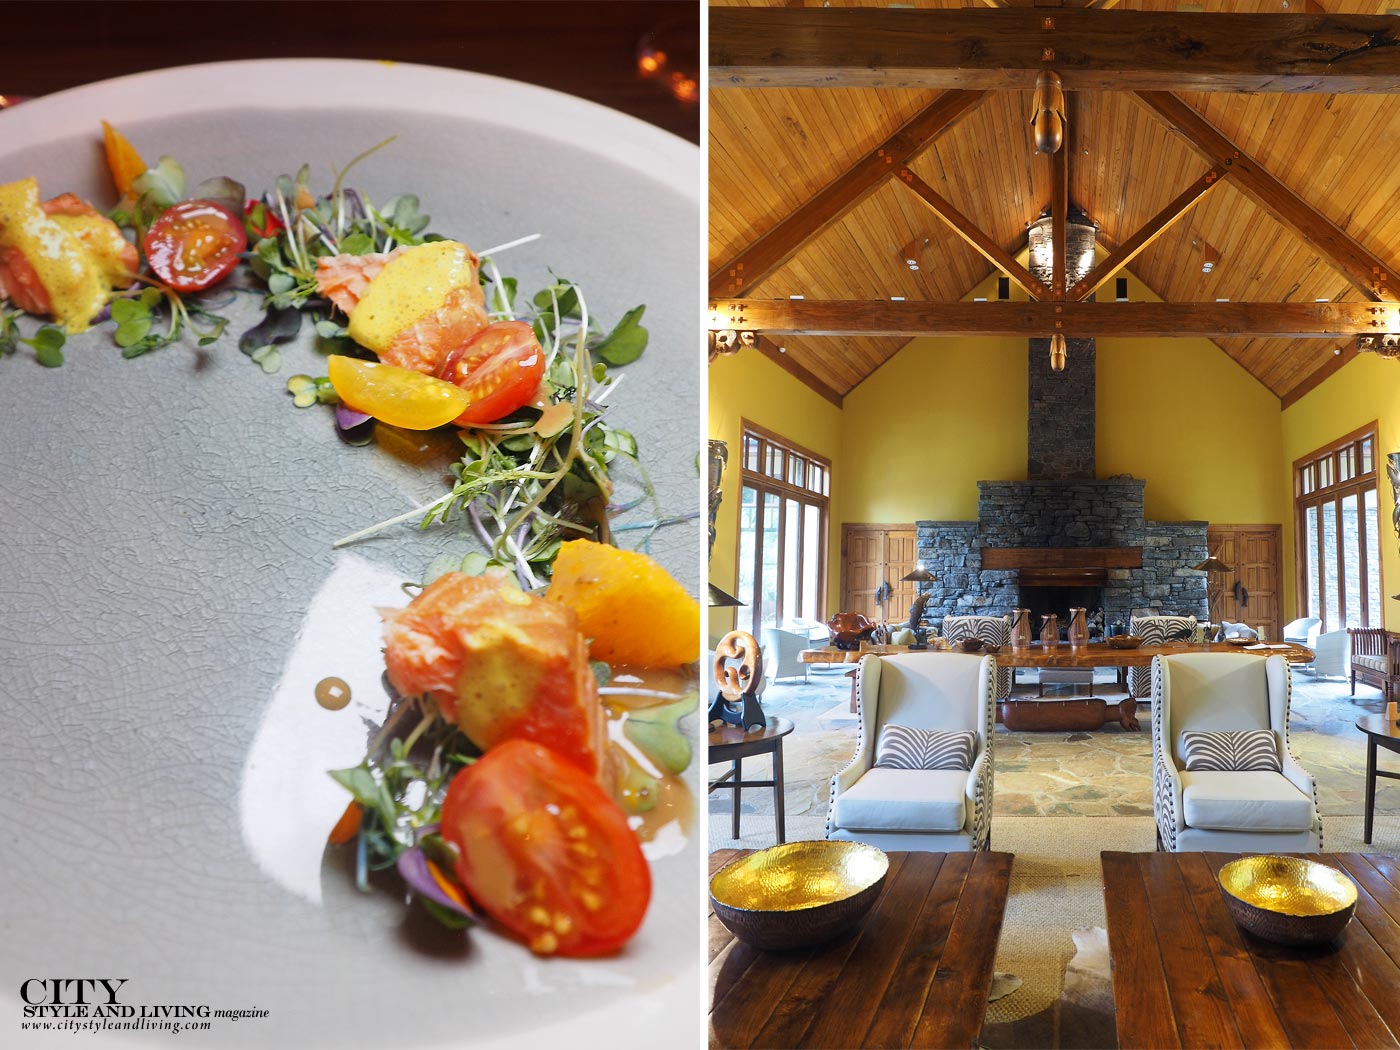 City Style and Living Magazine treetops lodge and estate dinner salad and interior of great hall